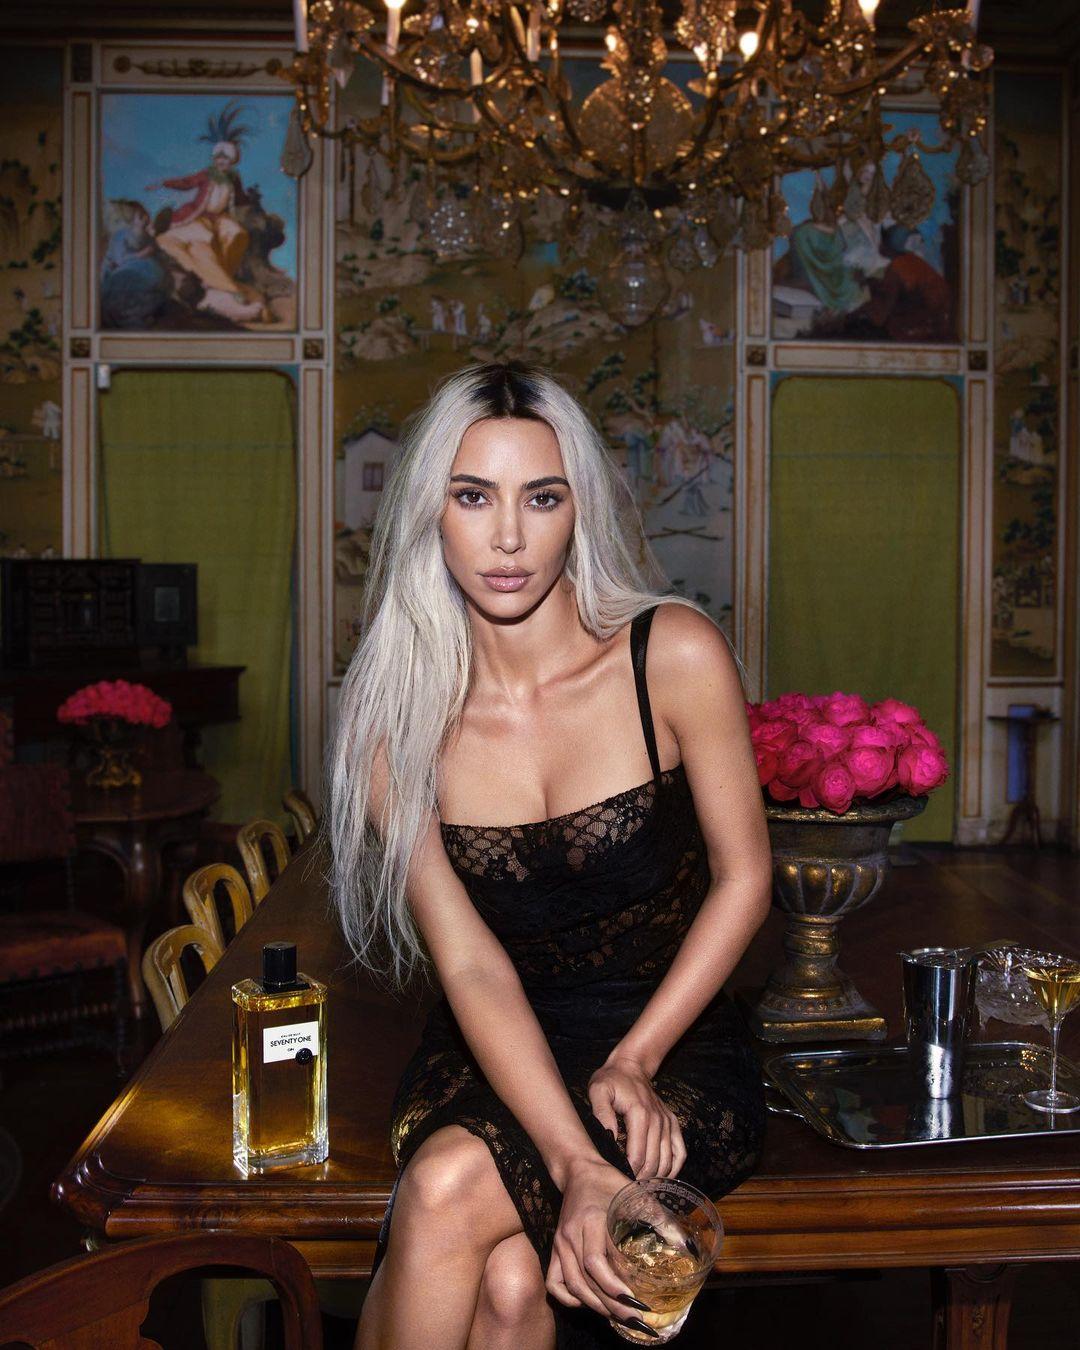 Kim Kardashian features in an alcohol ad